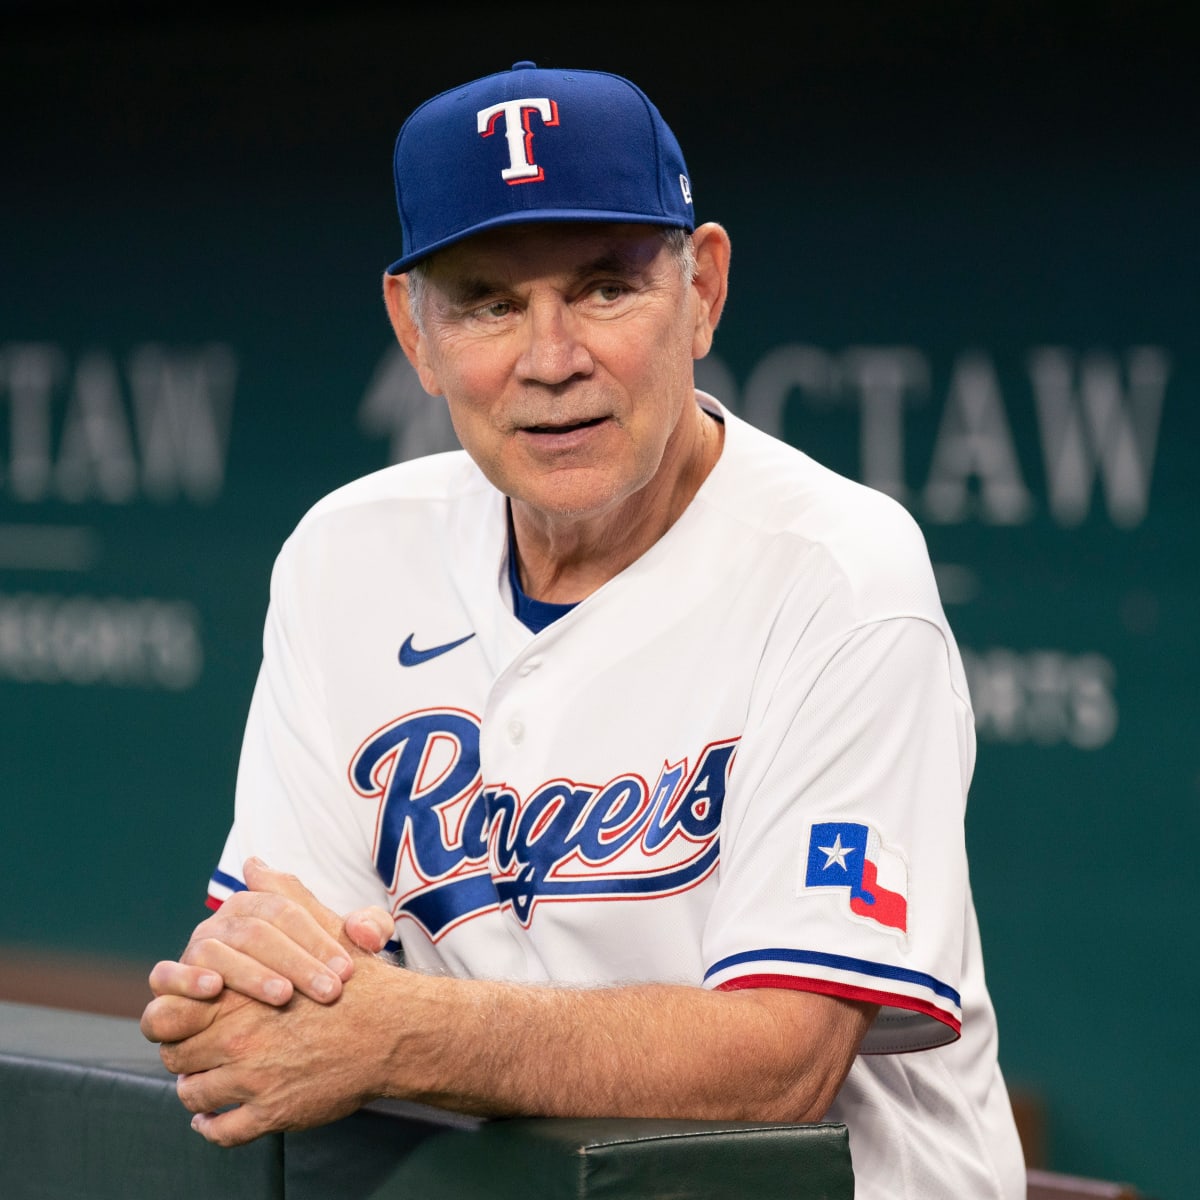 Bruce Bochy named new manager of Texas Rangers : r/mlb